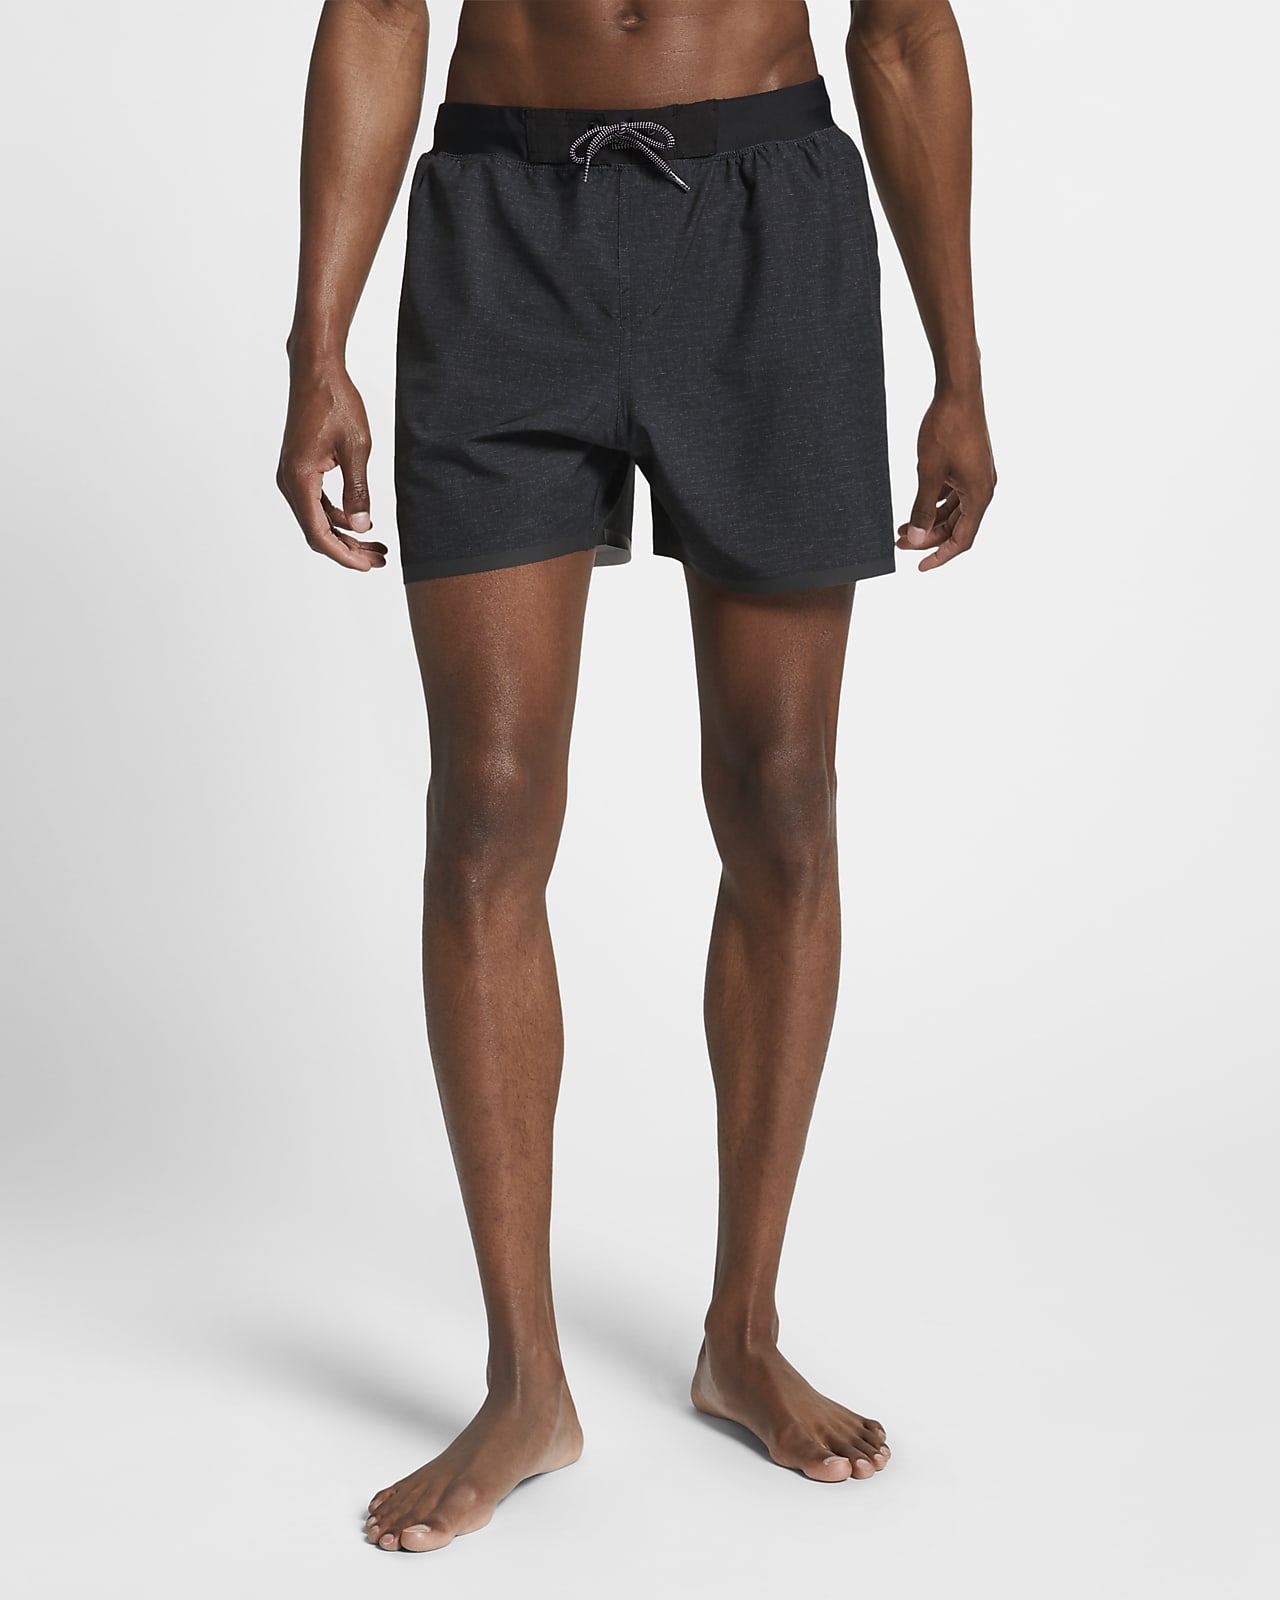 nike volleyball shorts 5 inch